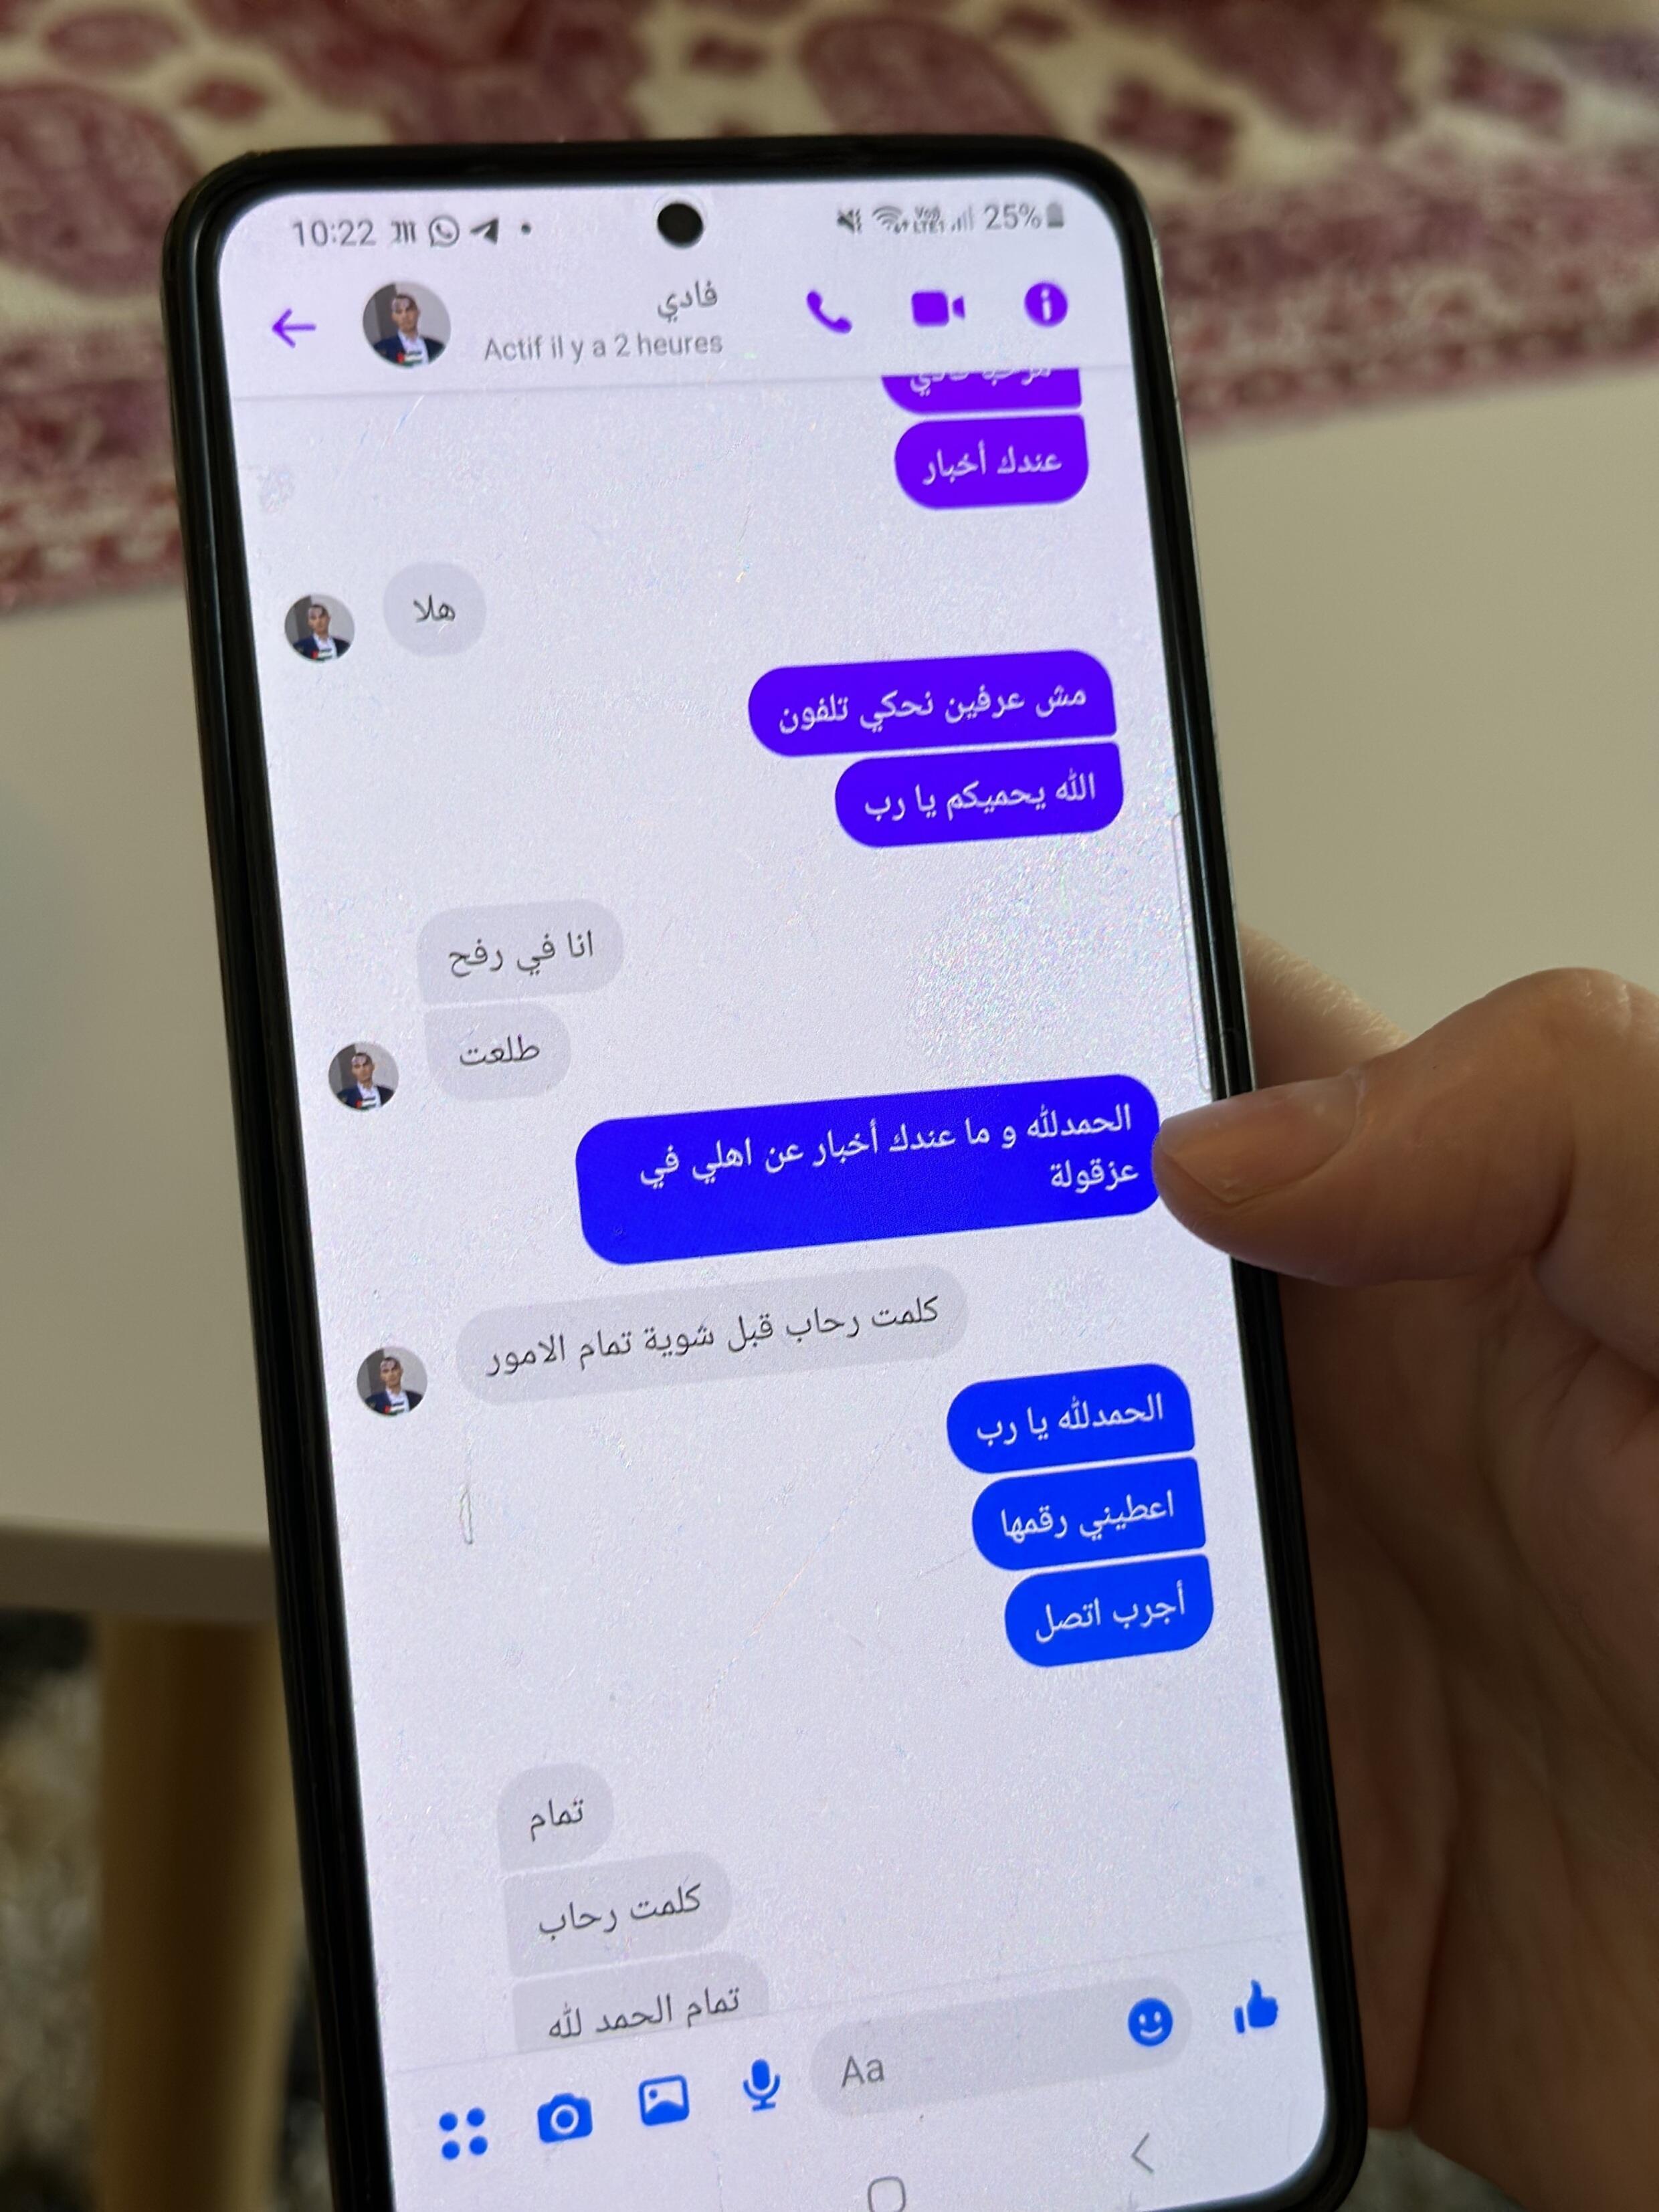 Sarah's uncle messages her to say he has arrived in Rafah, at the southern end of the Gaza Strip.